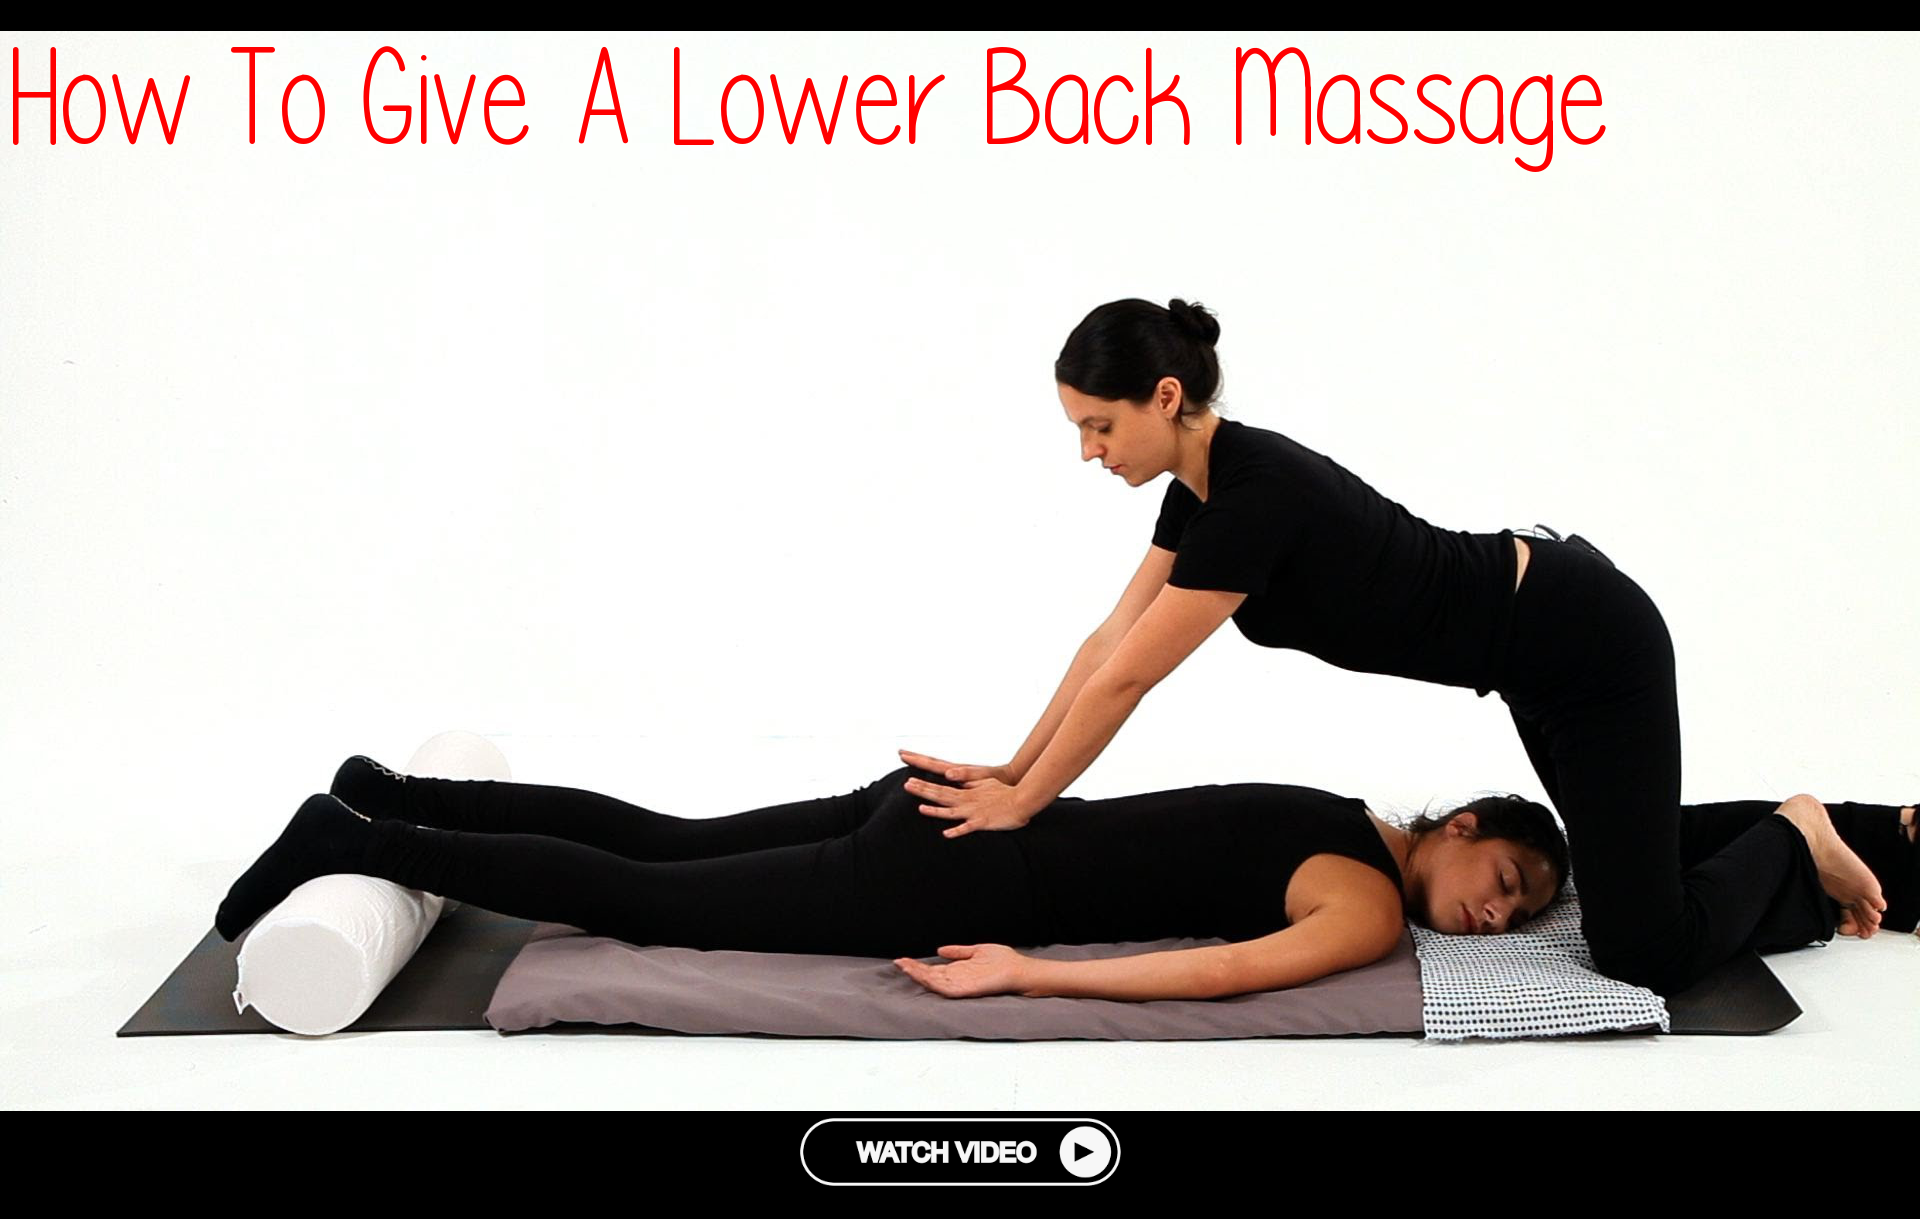 How To Give A Lower Back Massage